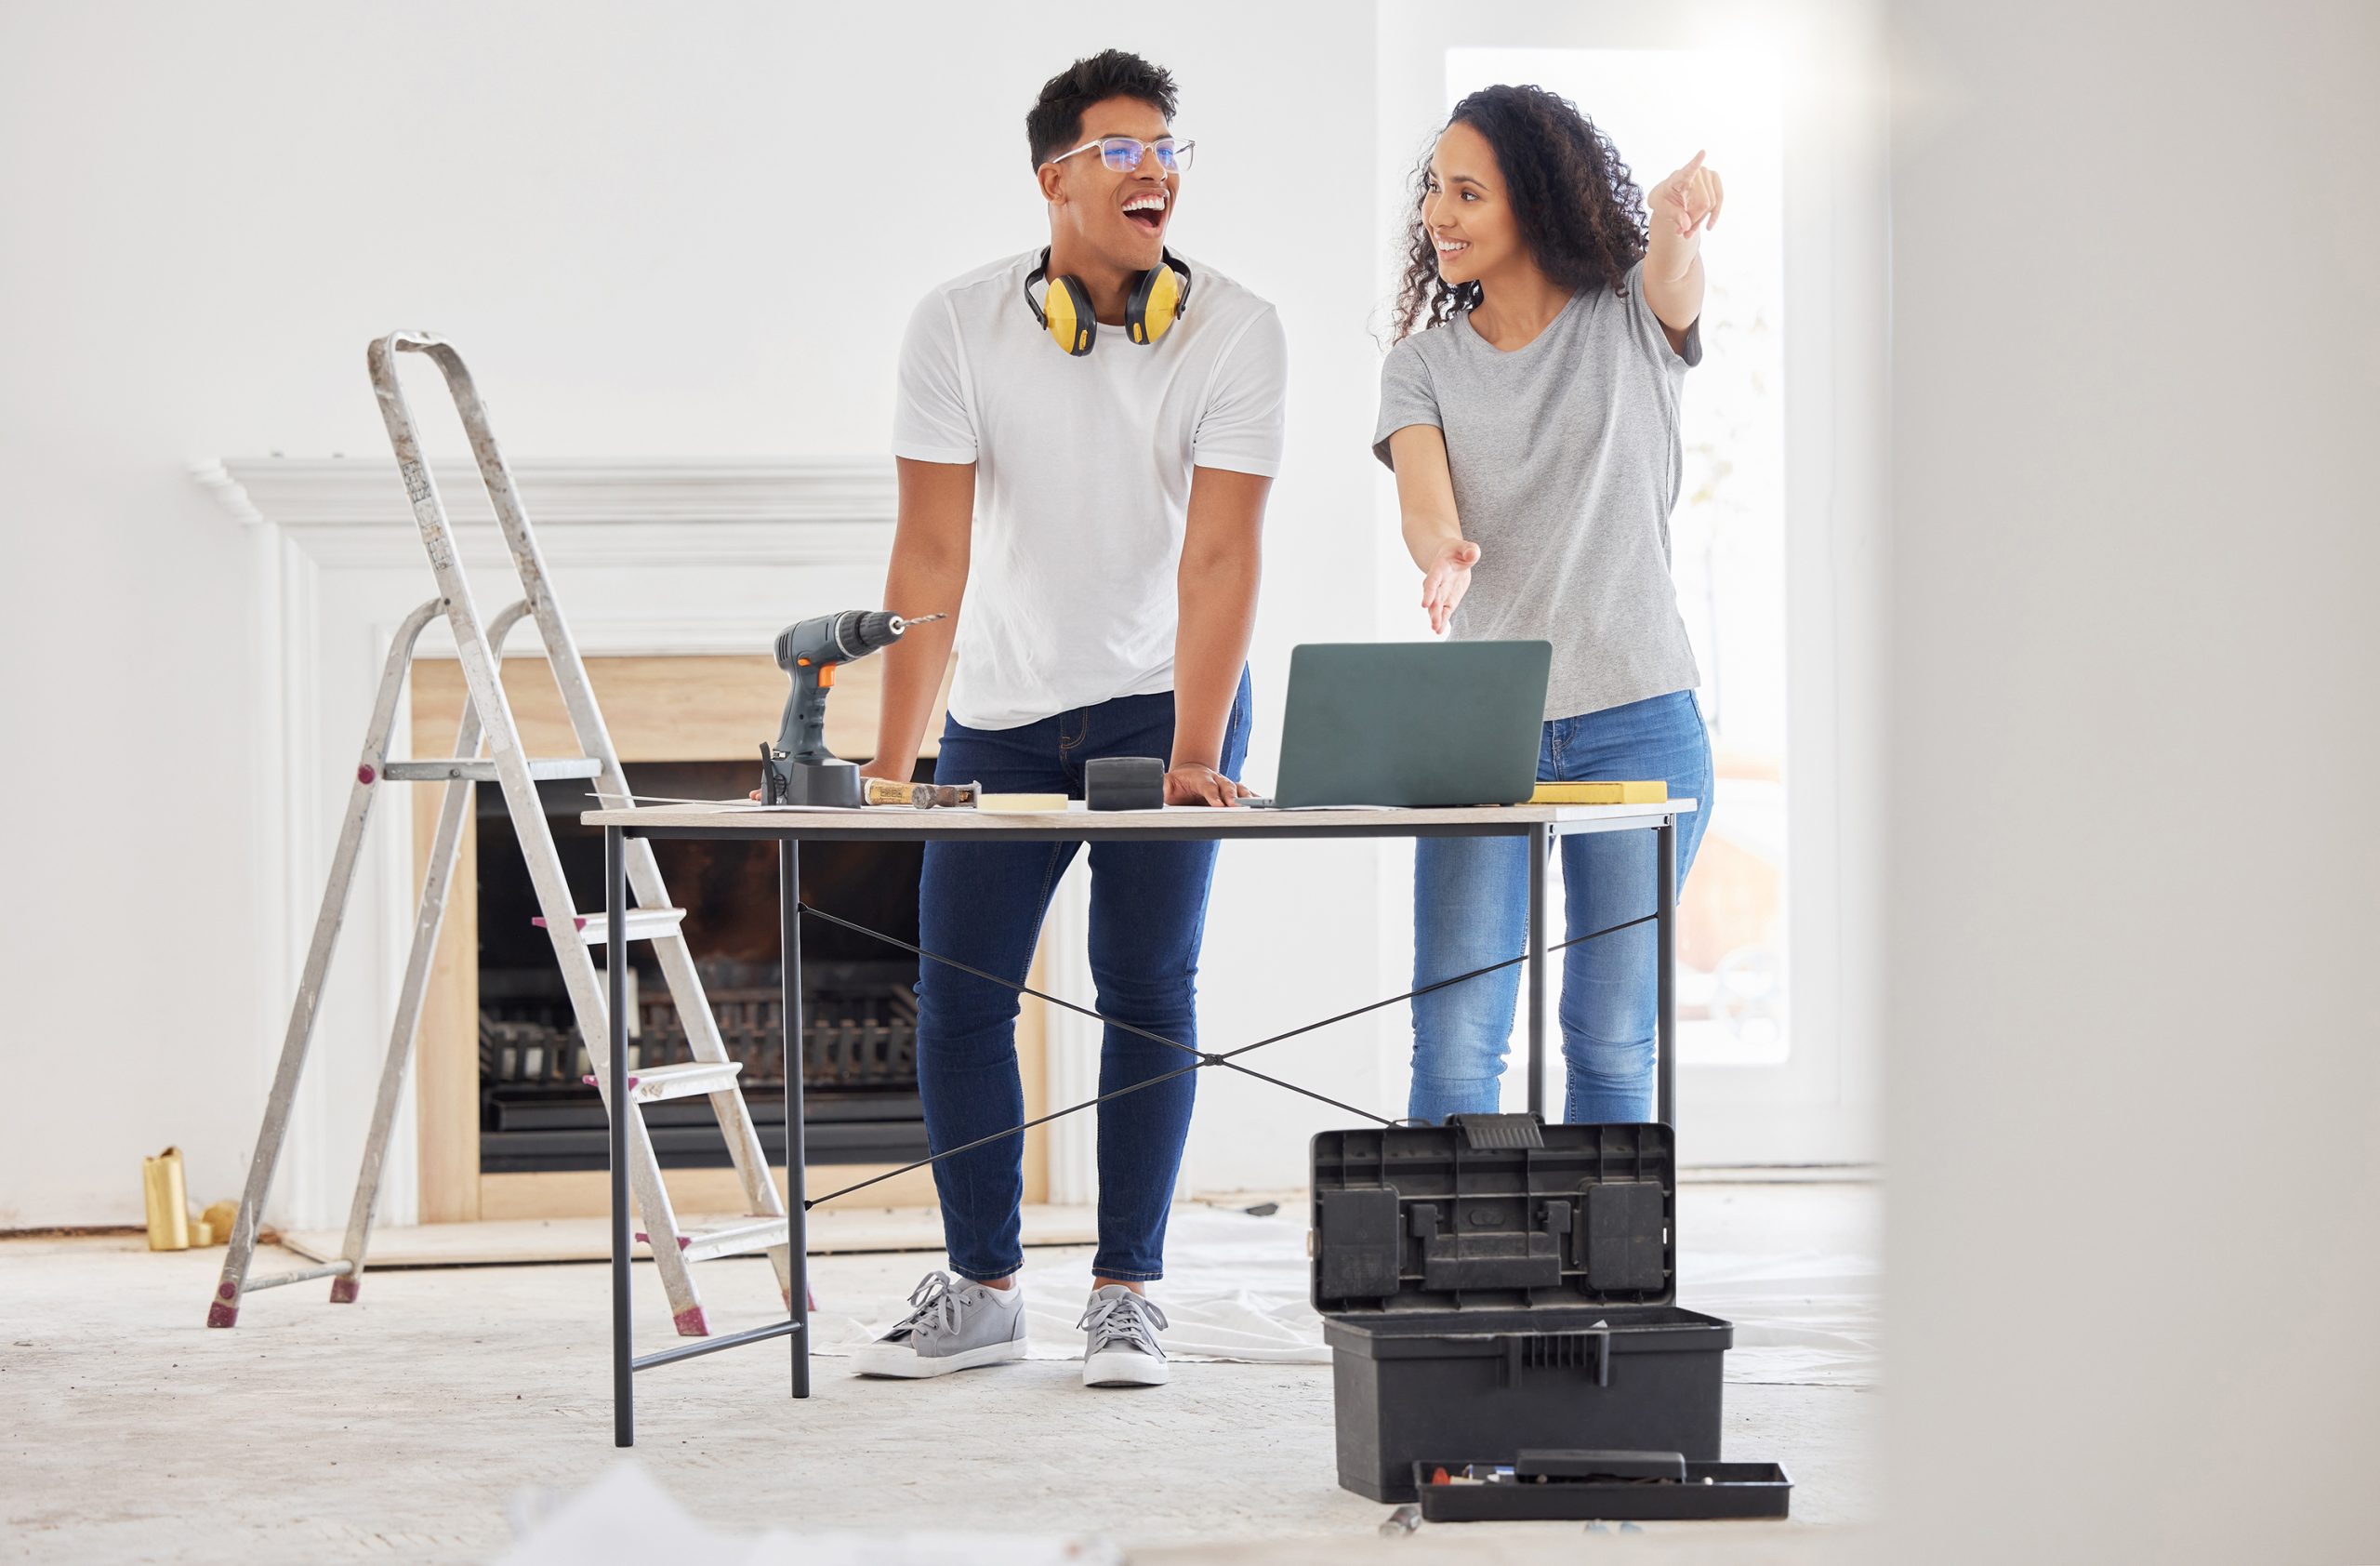 Renovating a house is a no brainer for people who like a challenge.